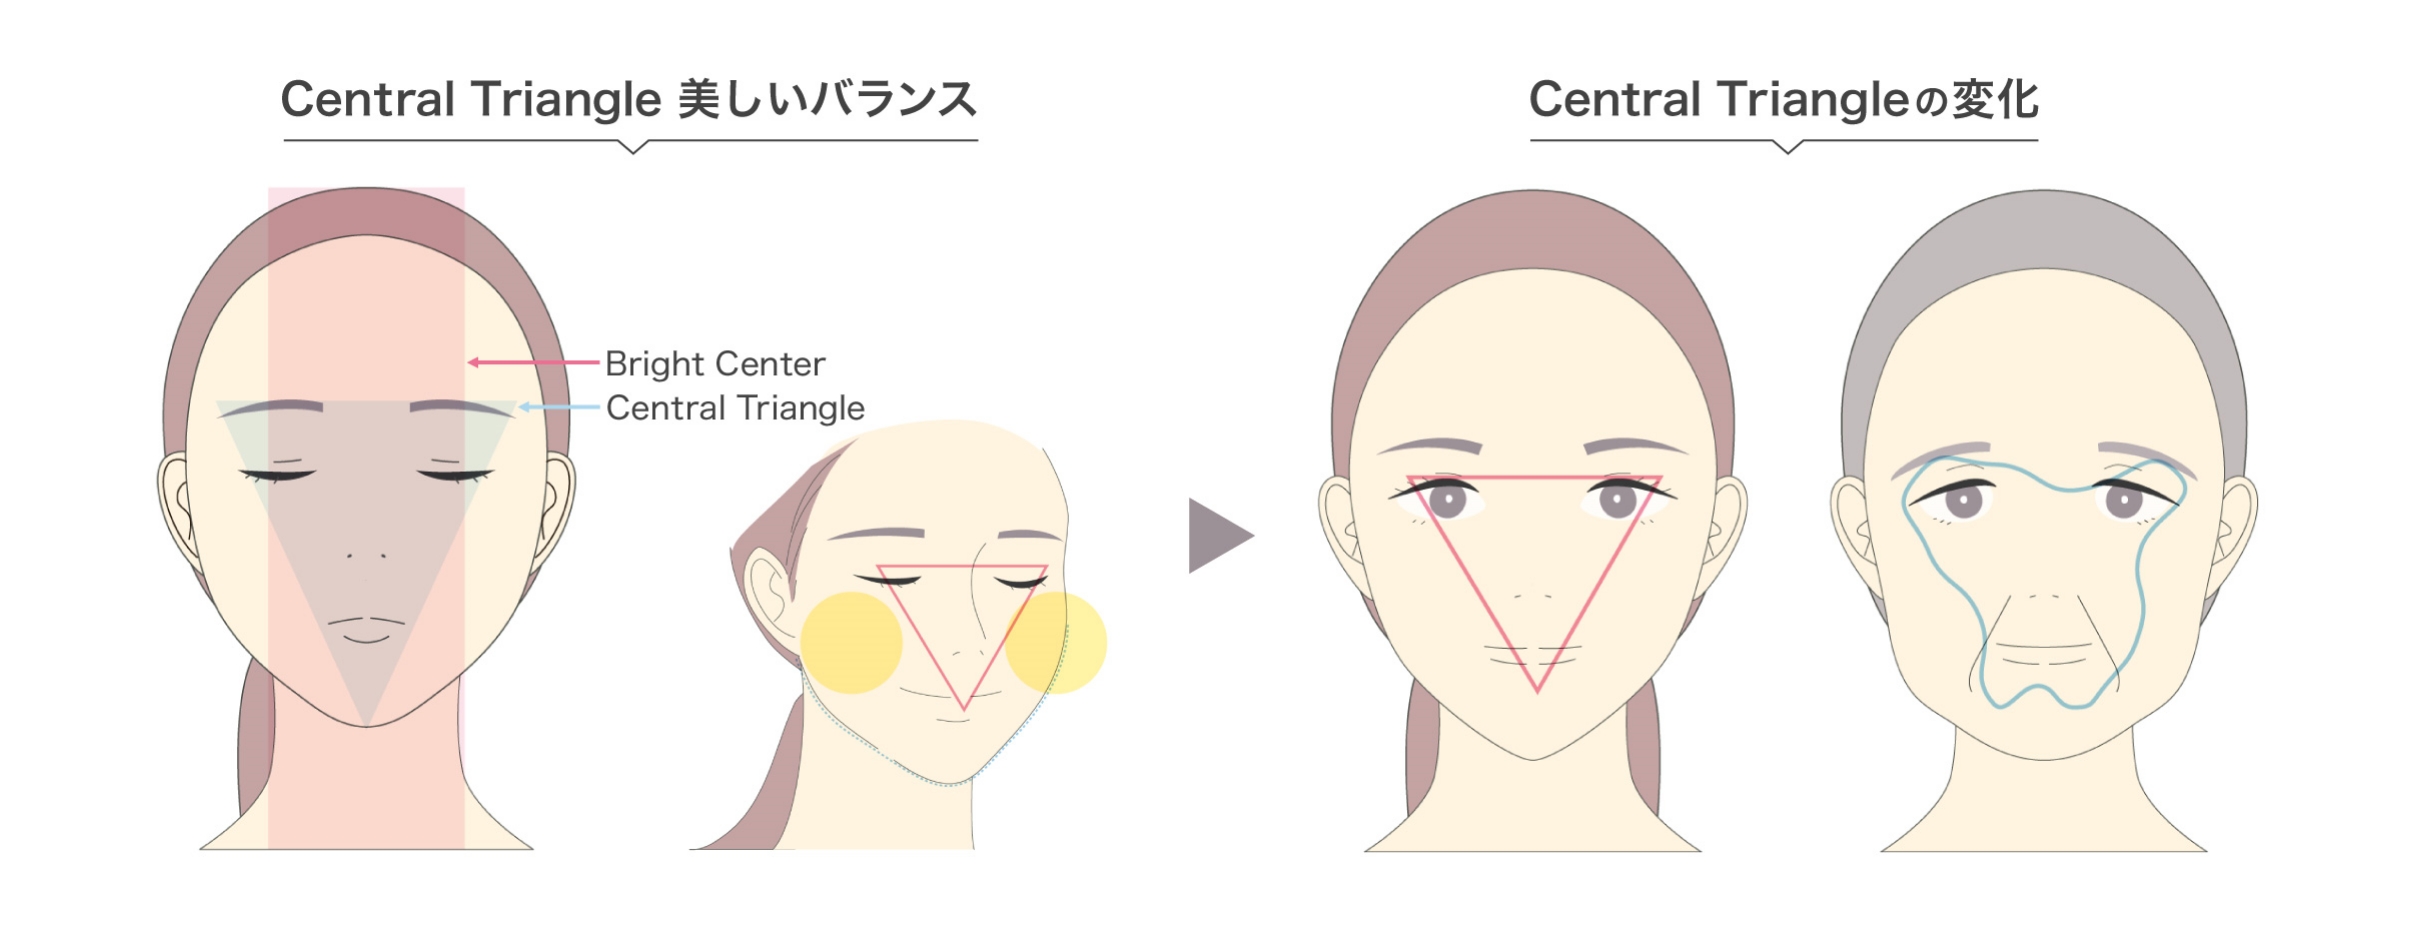 Central Triangle 美しいバランス Bright Center Central Triangle Central Triangleの変化